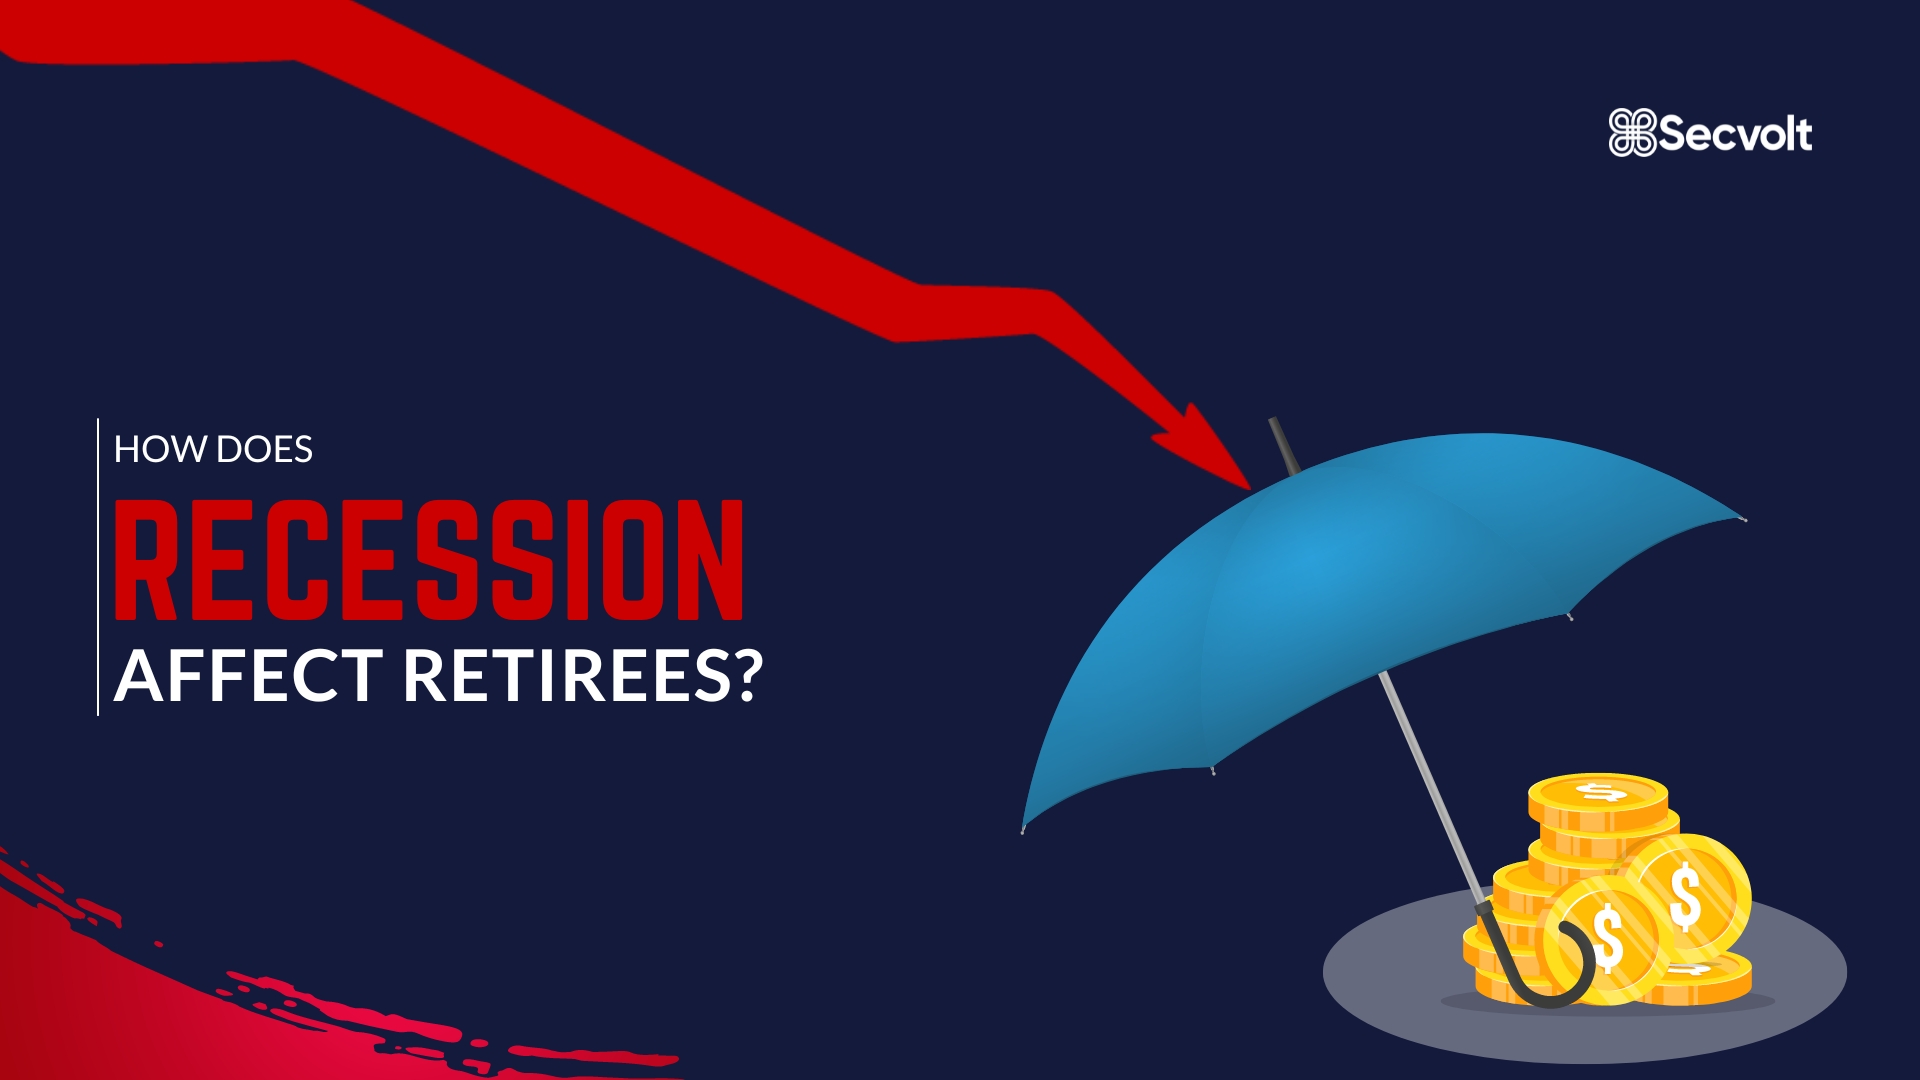 How Does Recession Affect Retirees?